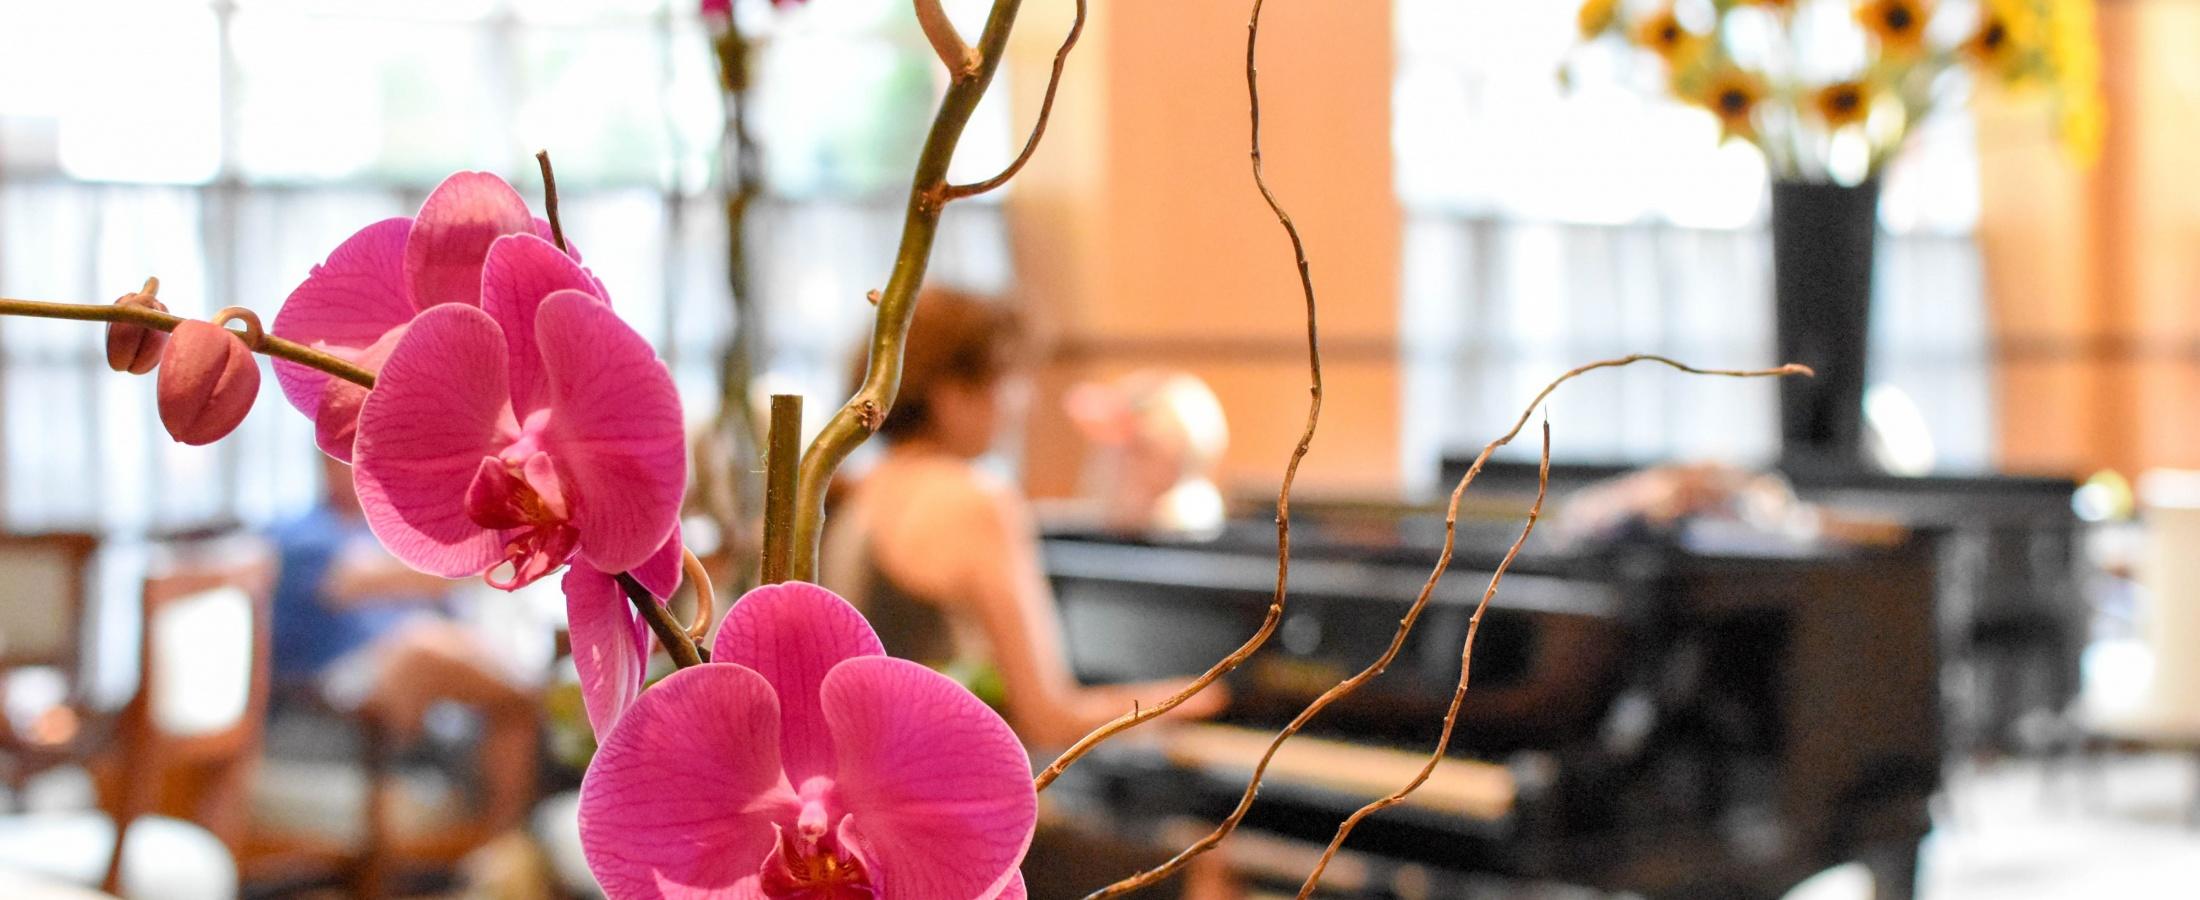 Purple orchid in front of a woman playing the piano in the grand lobby